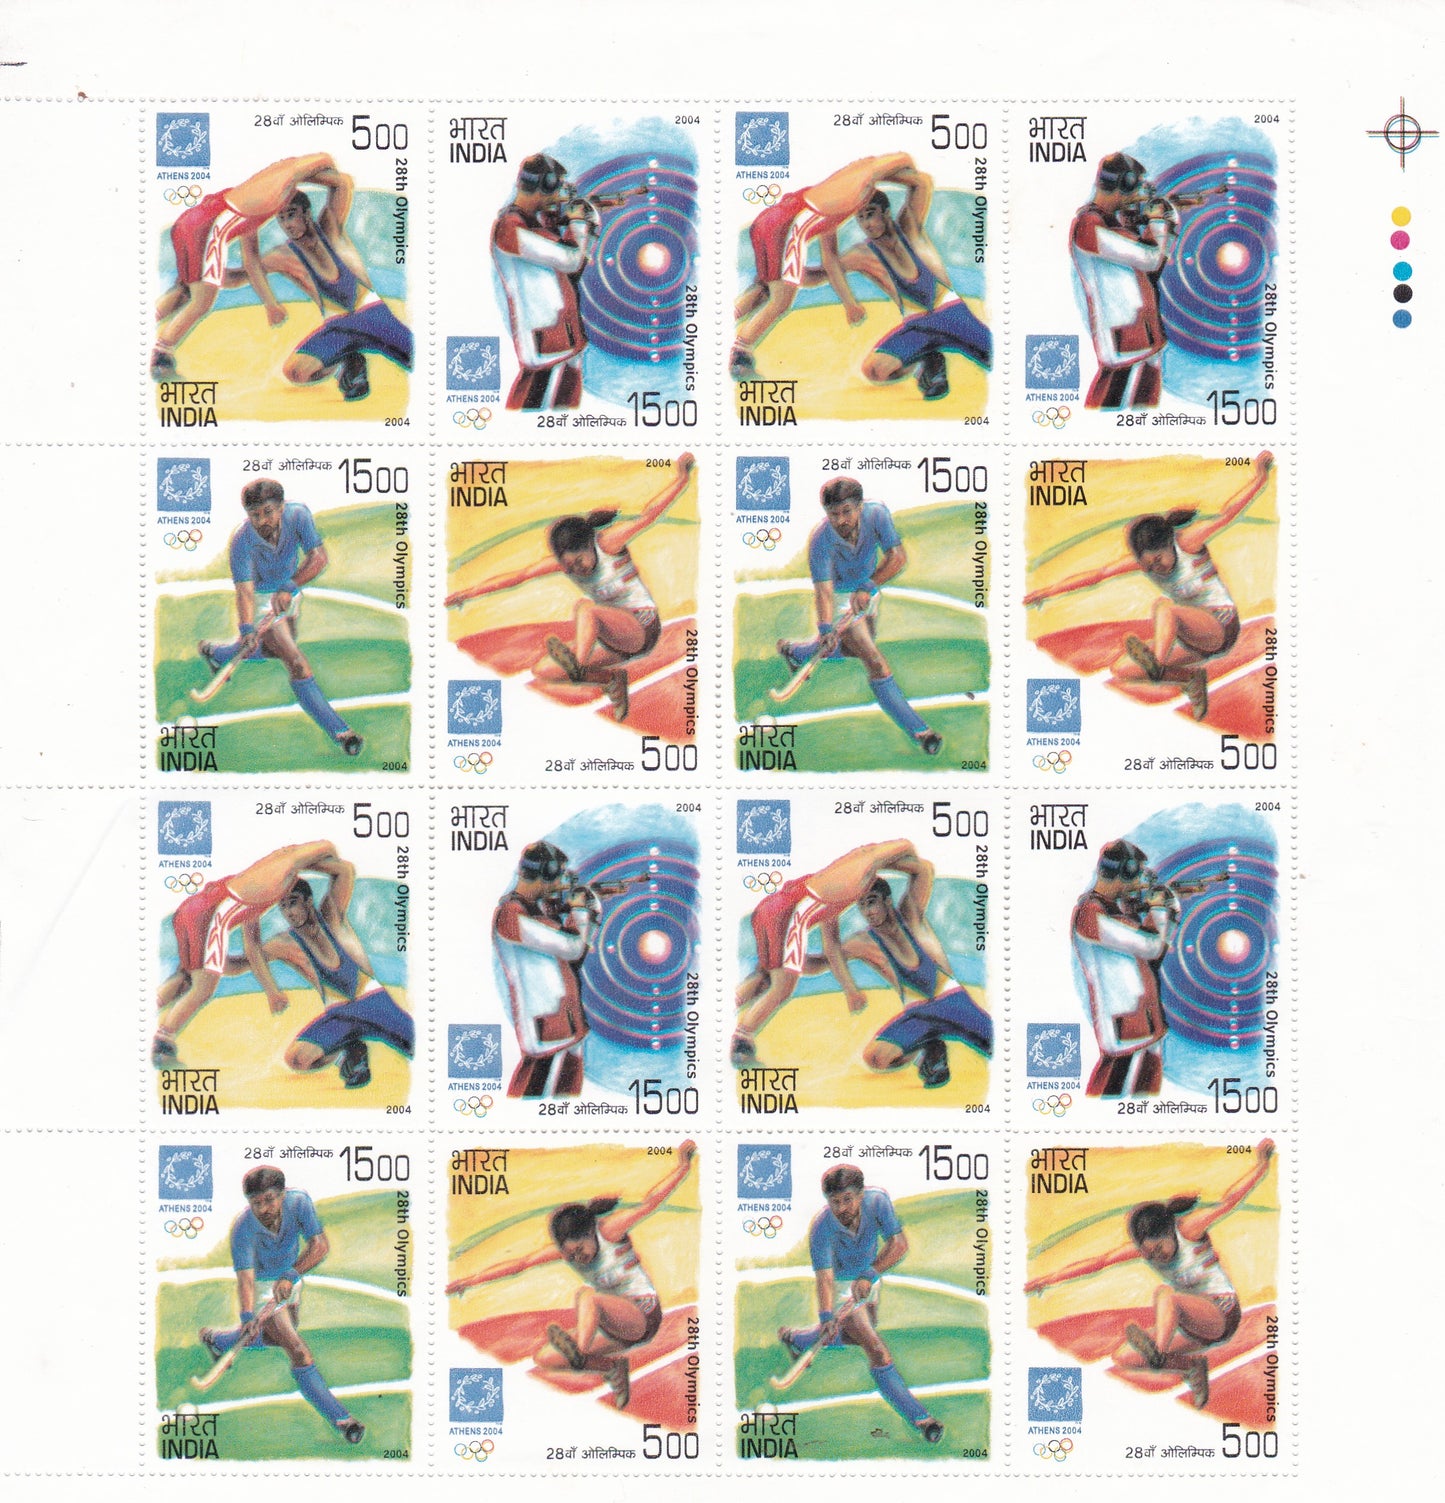 2 colour shifting error Olympic Sheet of 2004